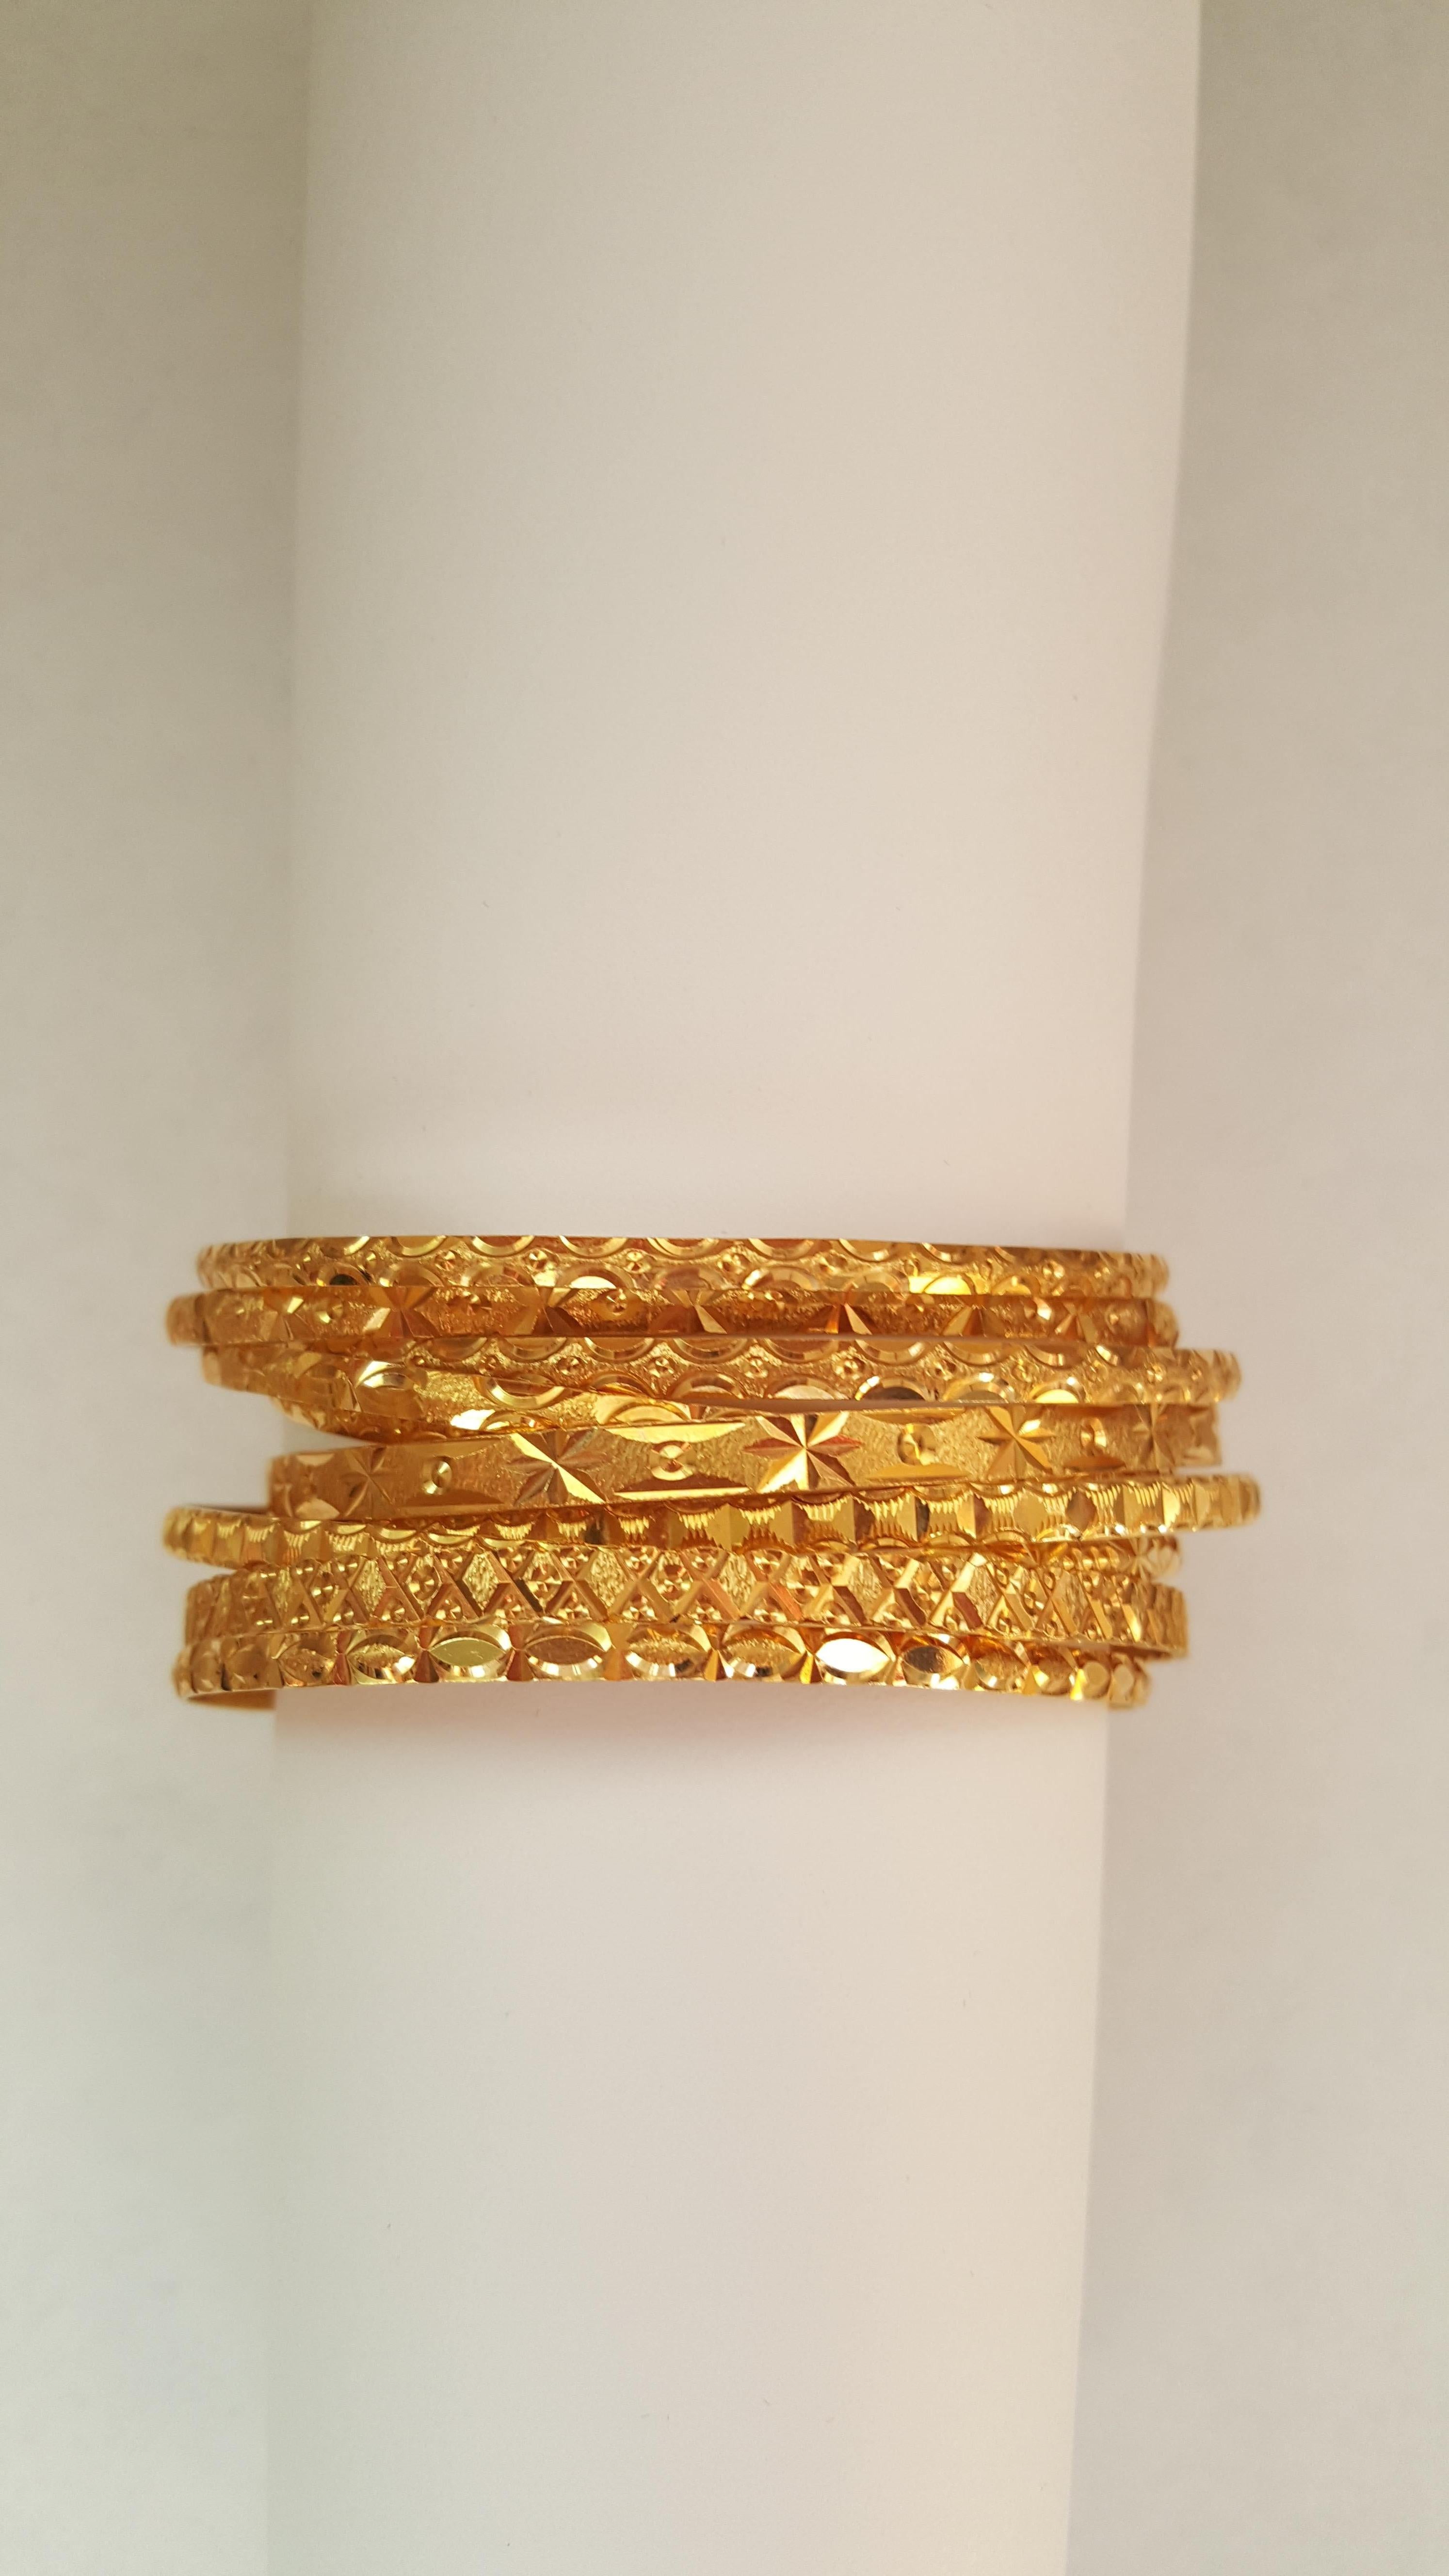 Modern Solid 21kt Gold Bangles Set of 11 Very Good Condition Diamond Cut 104.96 grams